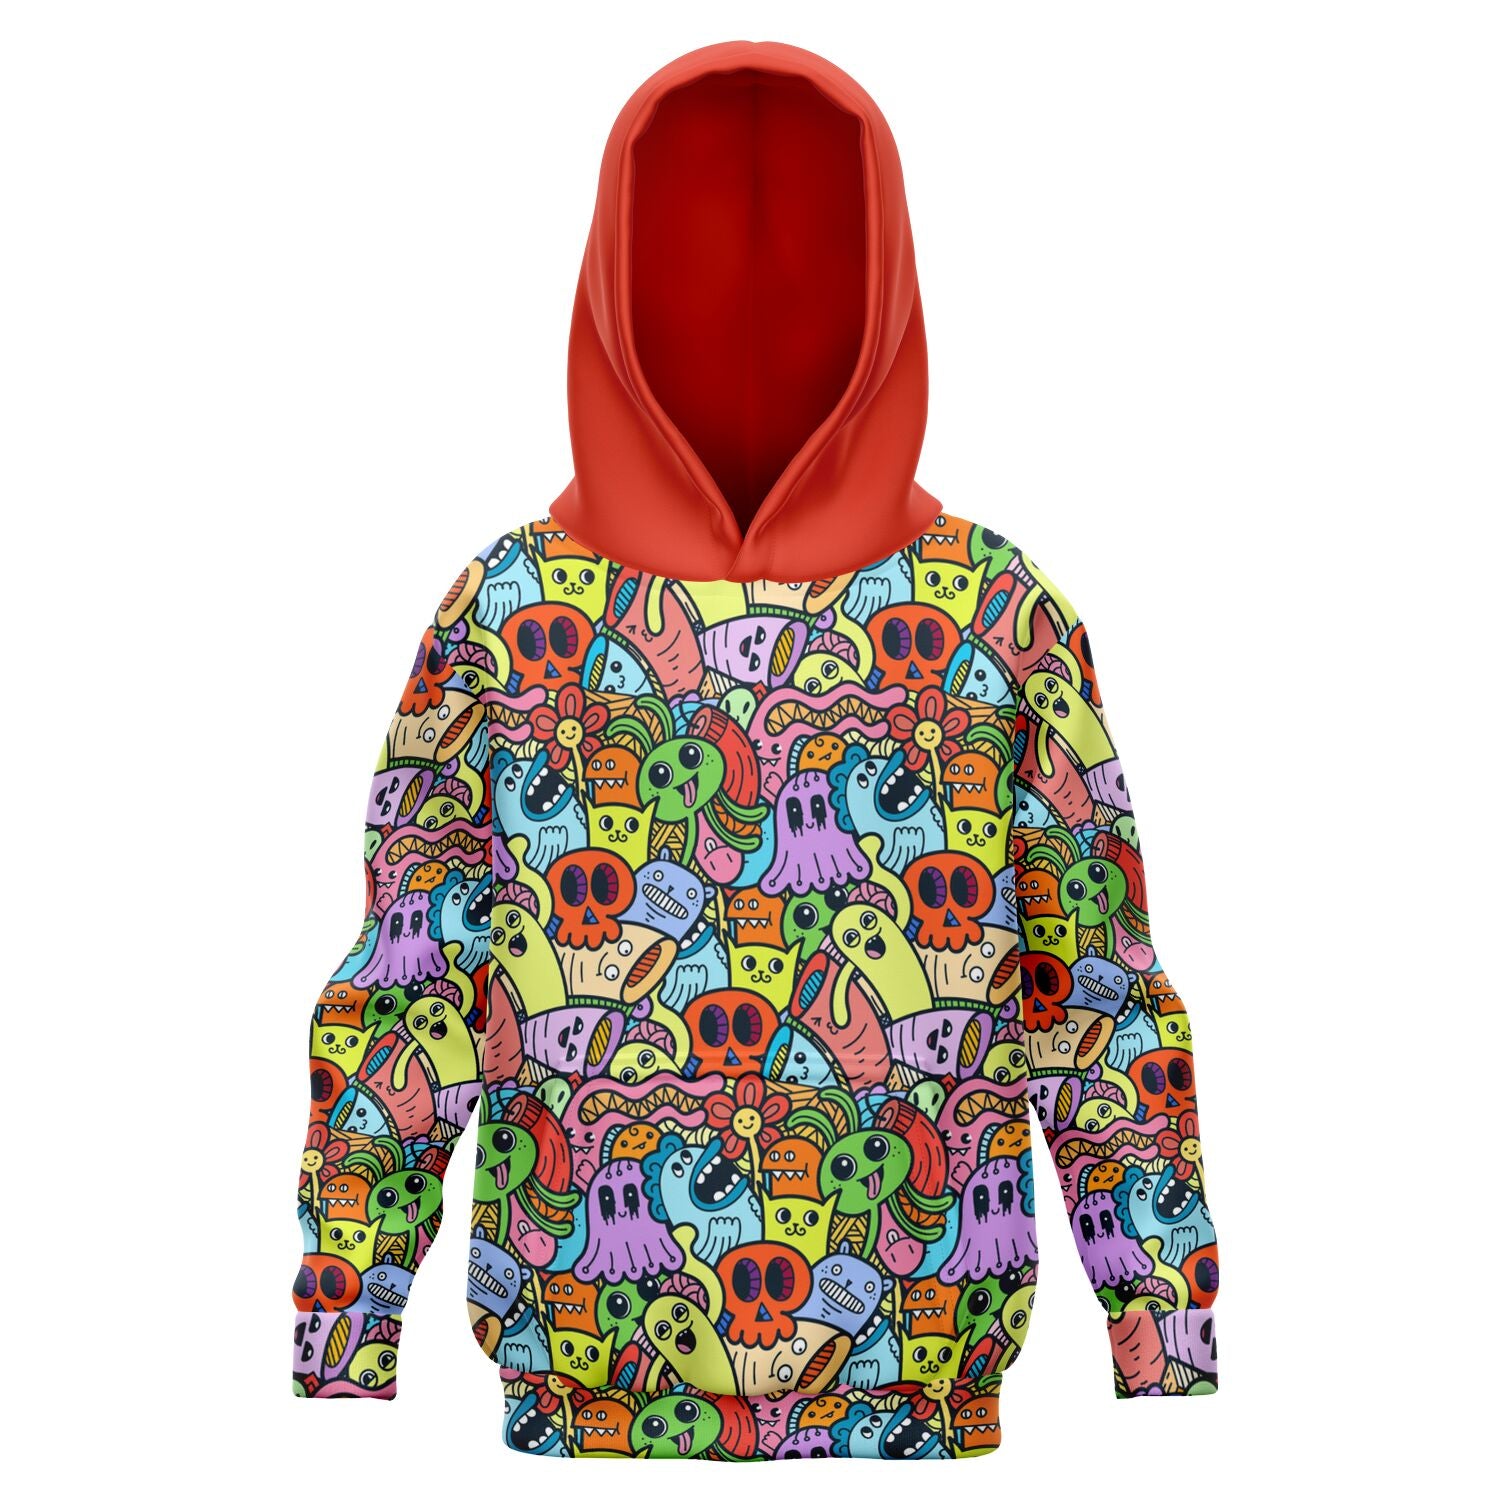 Fun and Whimsical Monster Doodle Hoodie for Kids - XXS - 1/2 Years - Sport Finesse